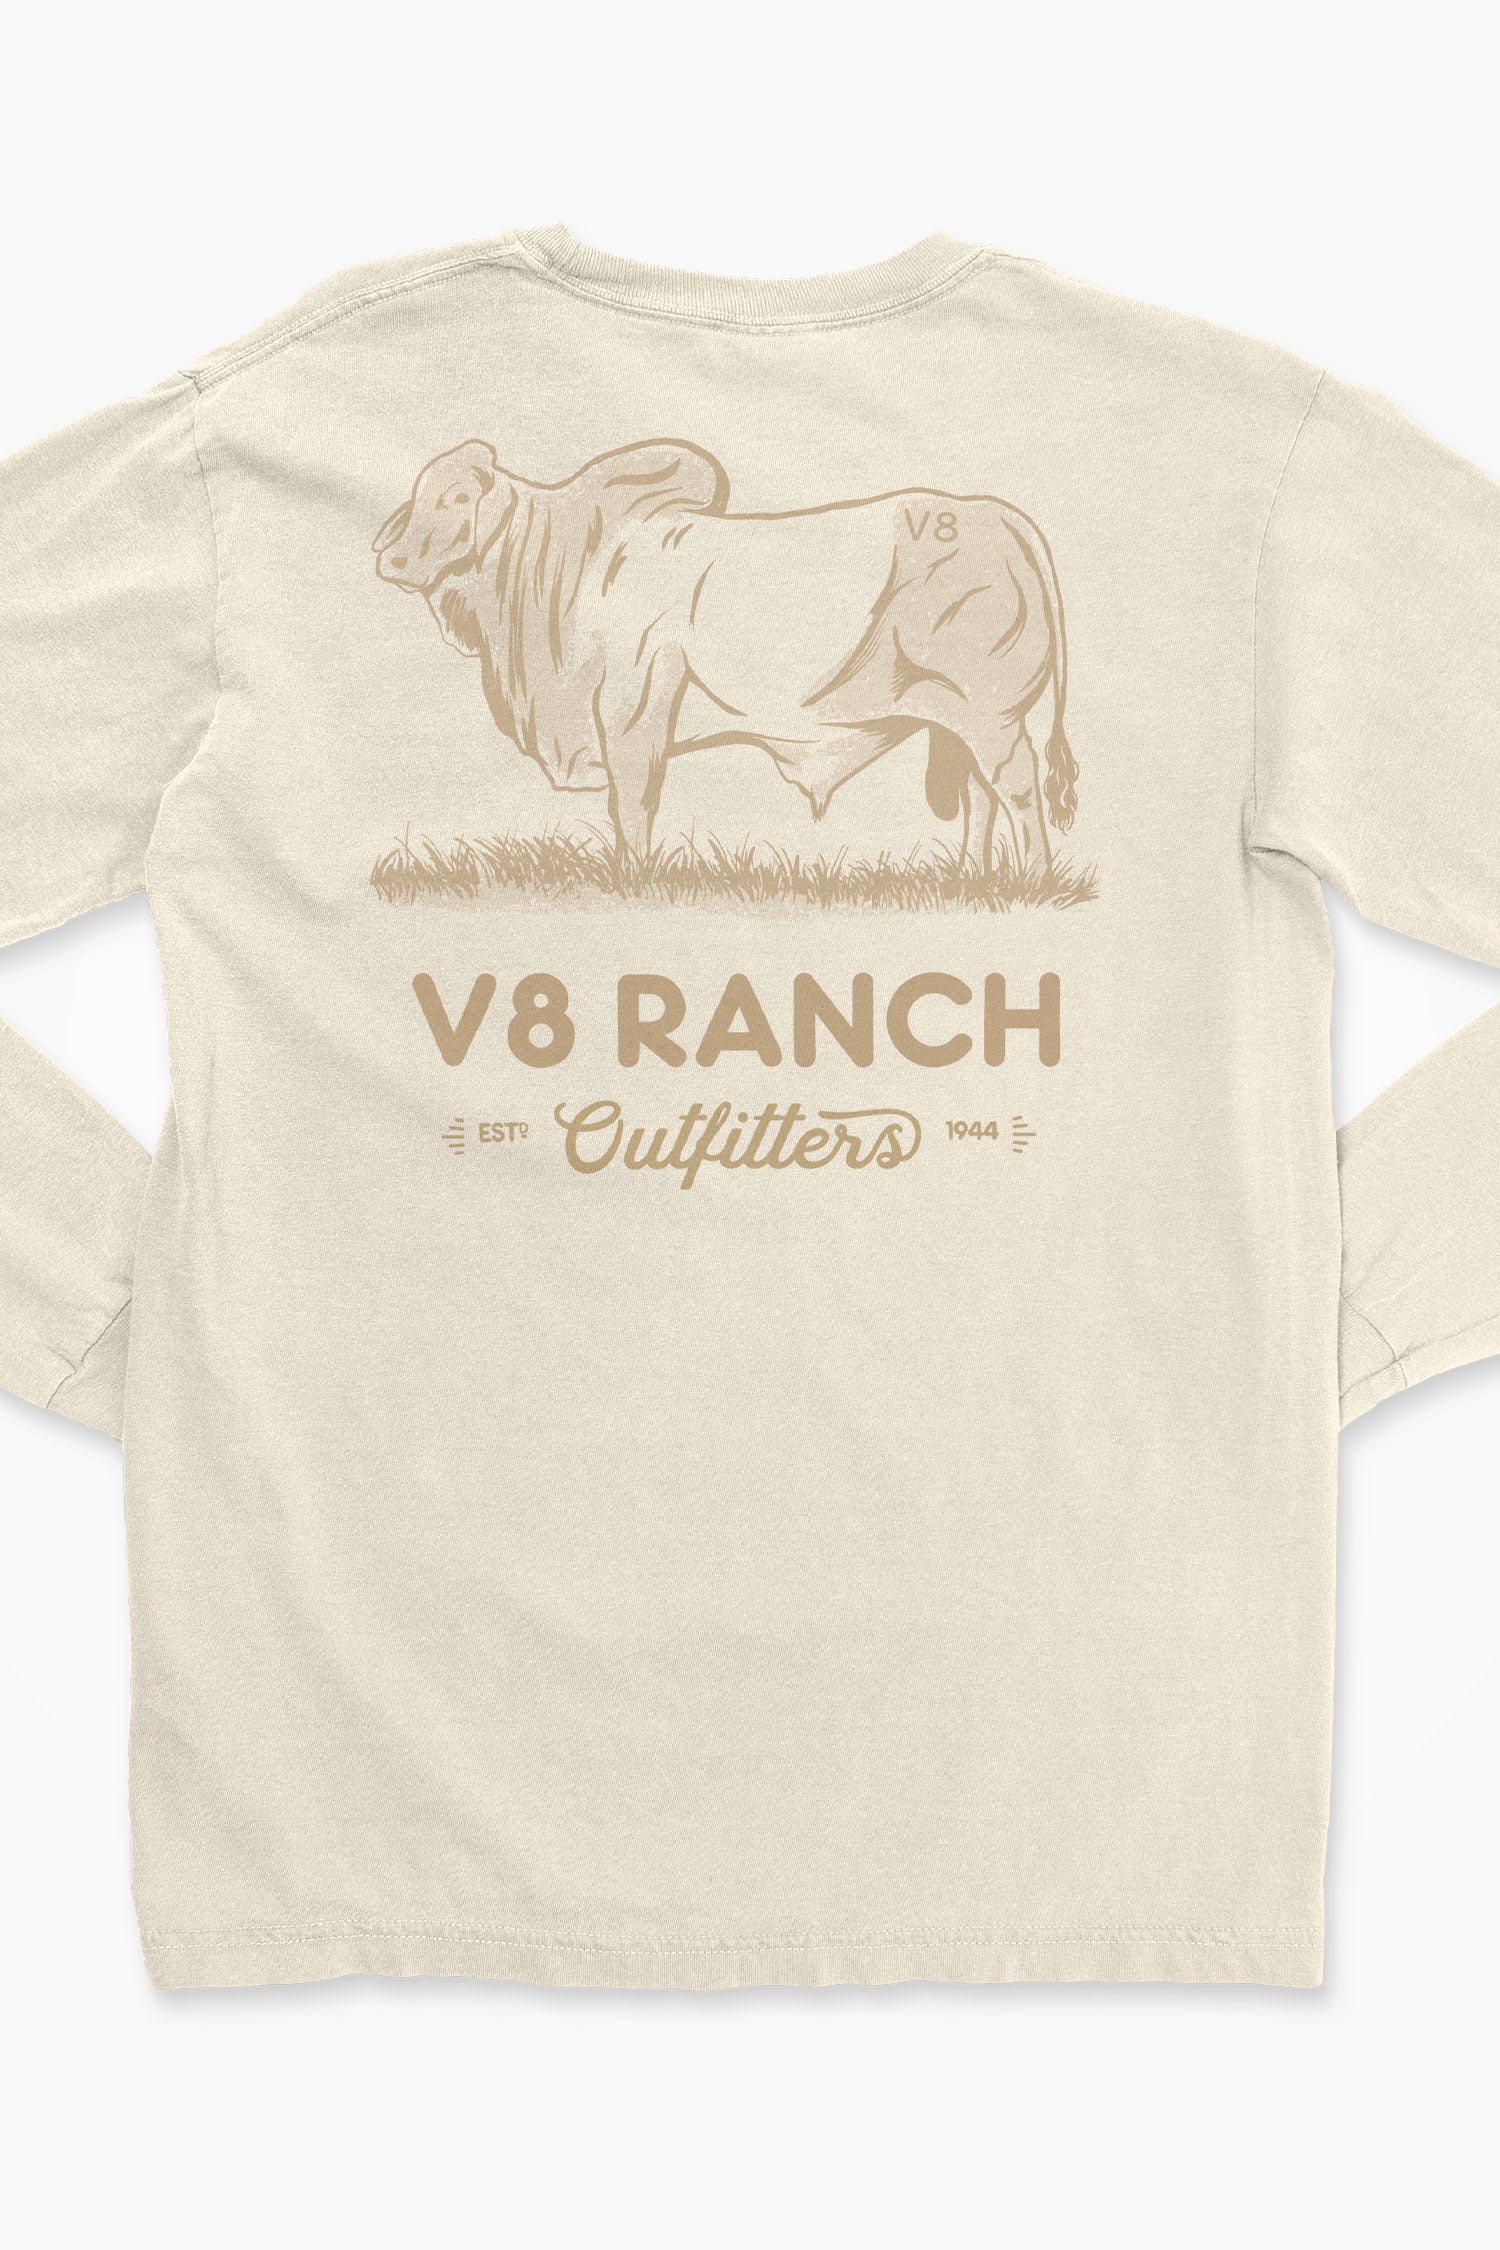 V8 Ranch Outfitters Long Sleeve Brahman Tee